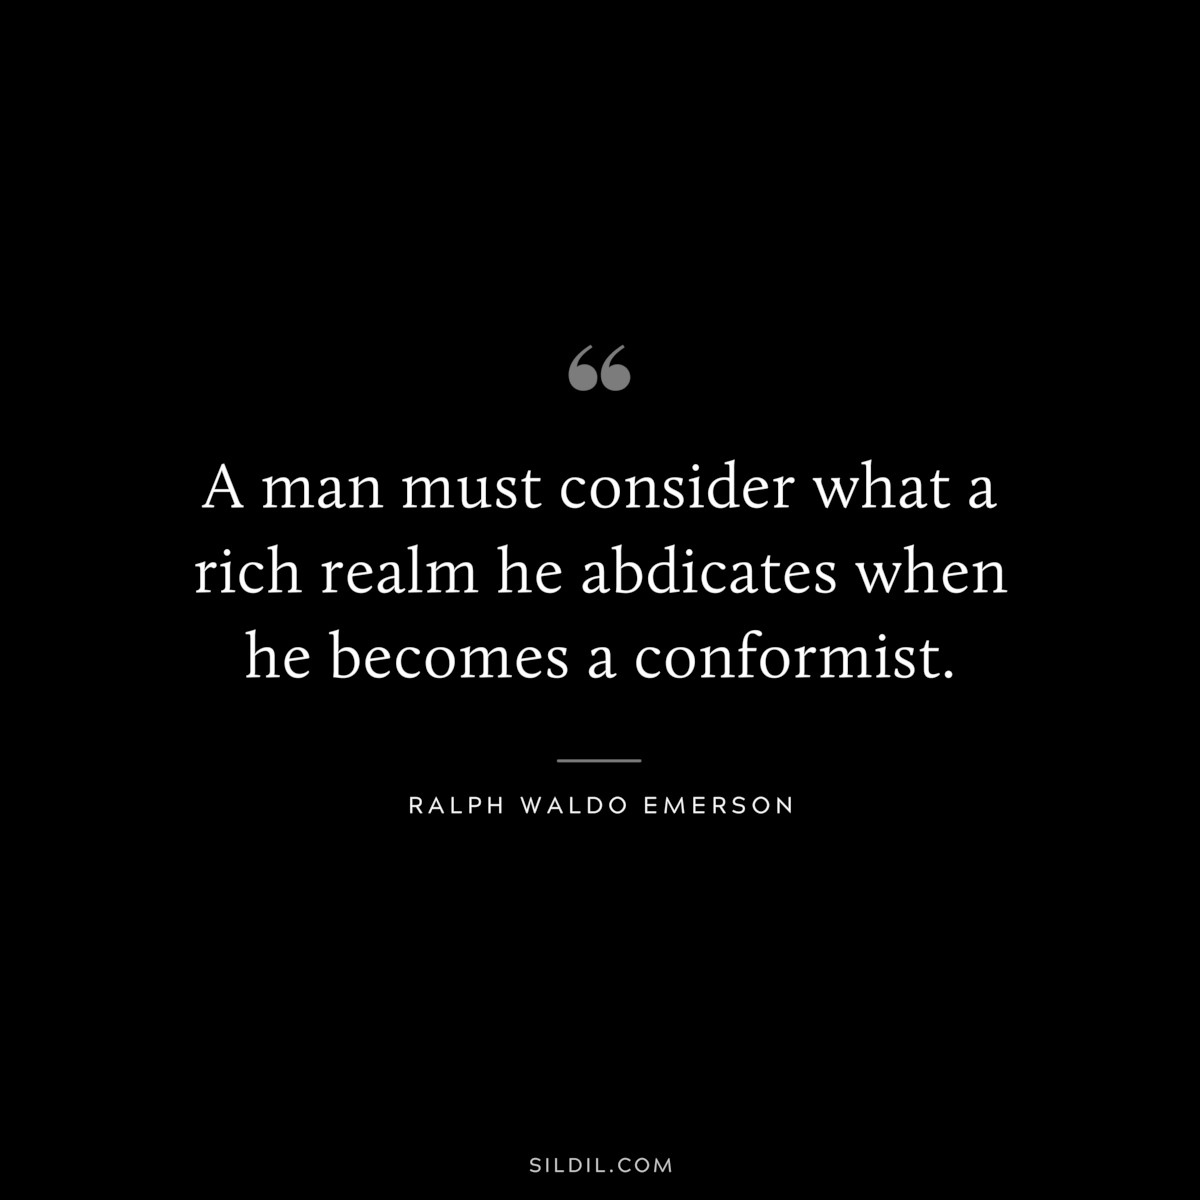 A man must consider what a rich realm he abdicates when he becomes a conformist. — Ralph Waldo Emerson